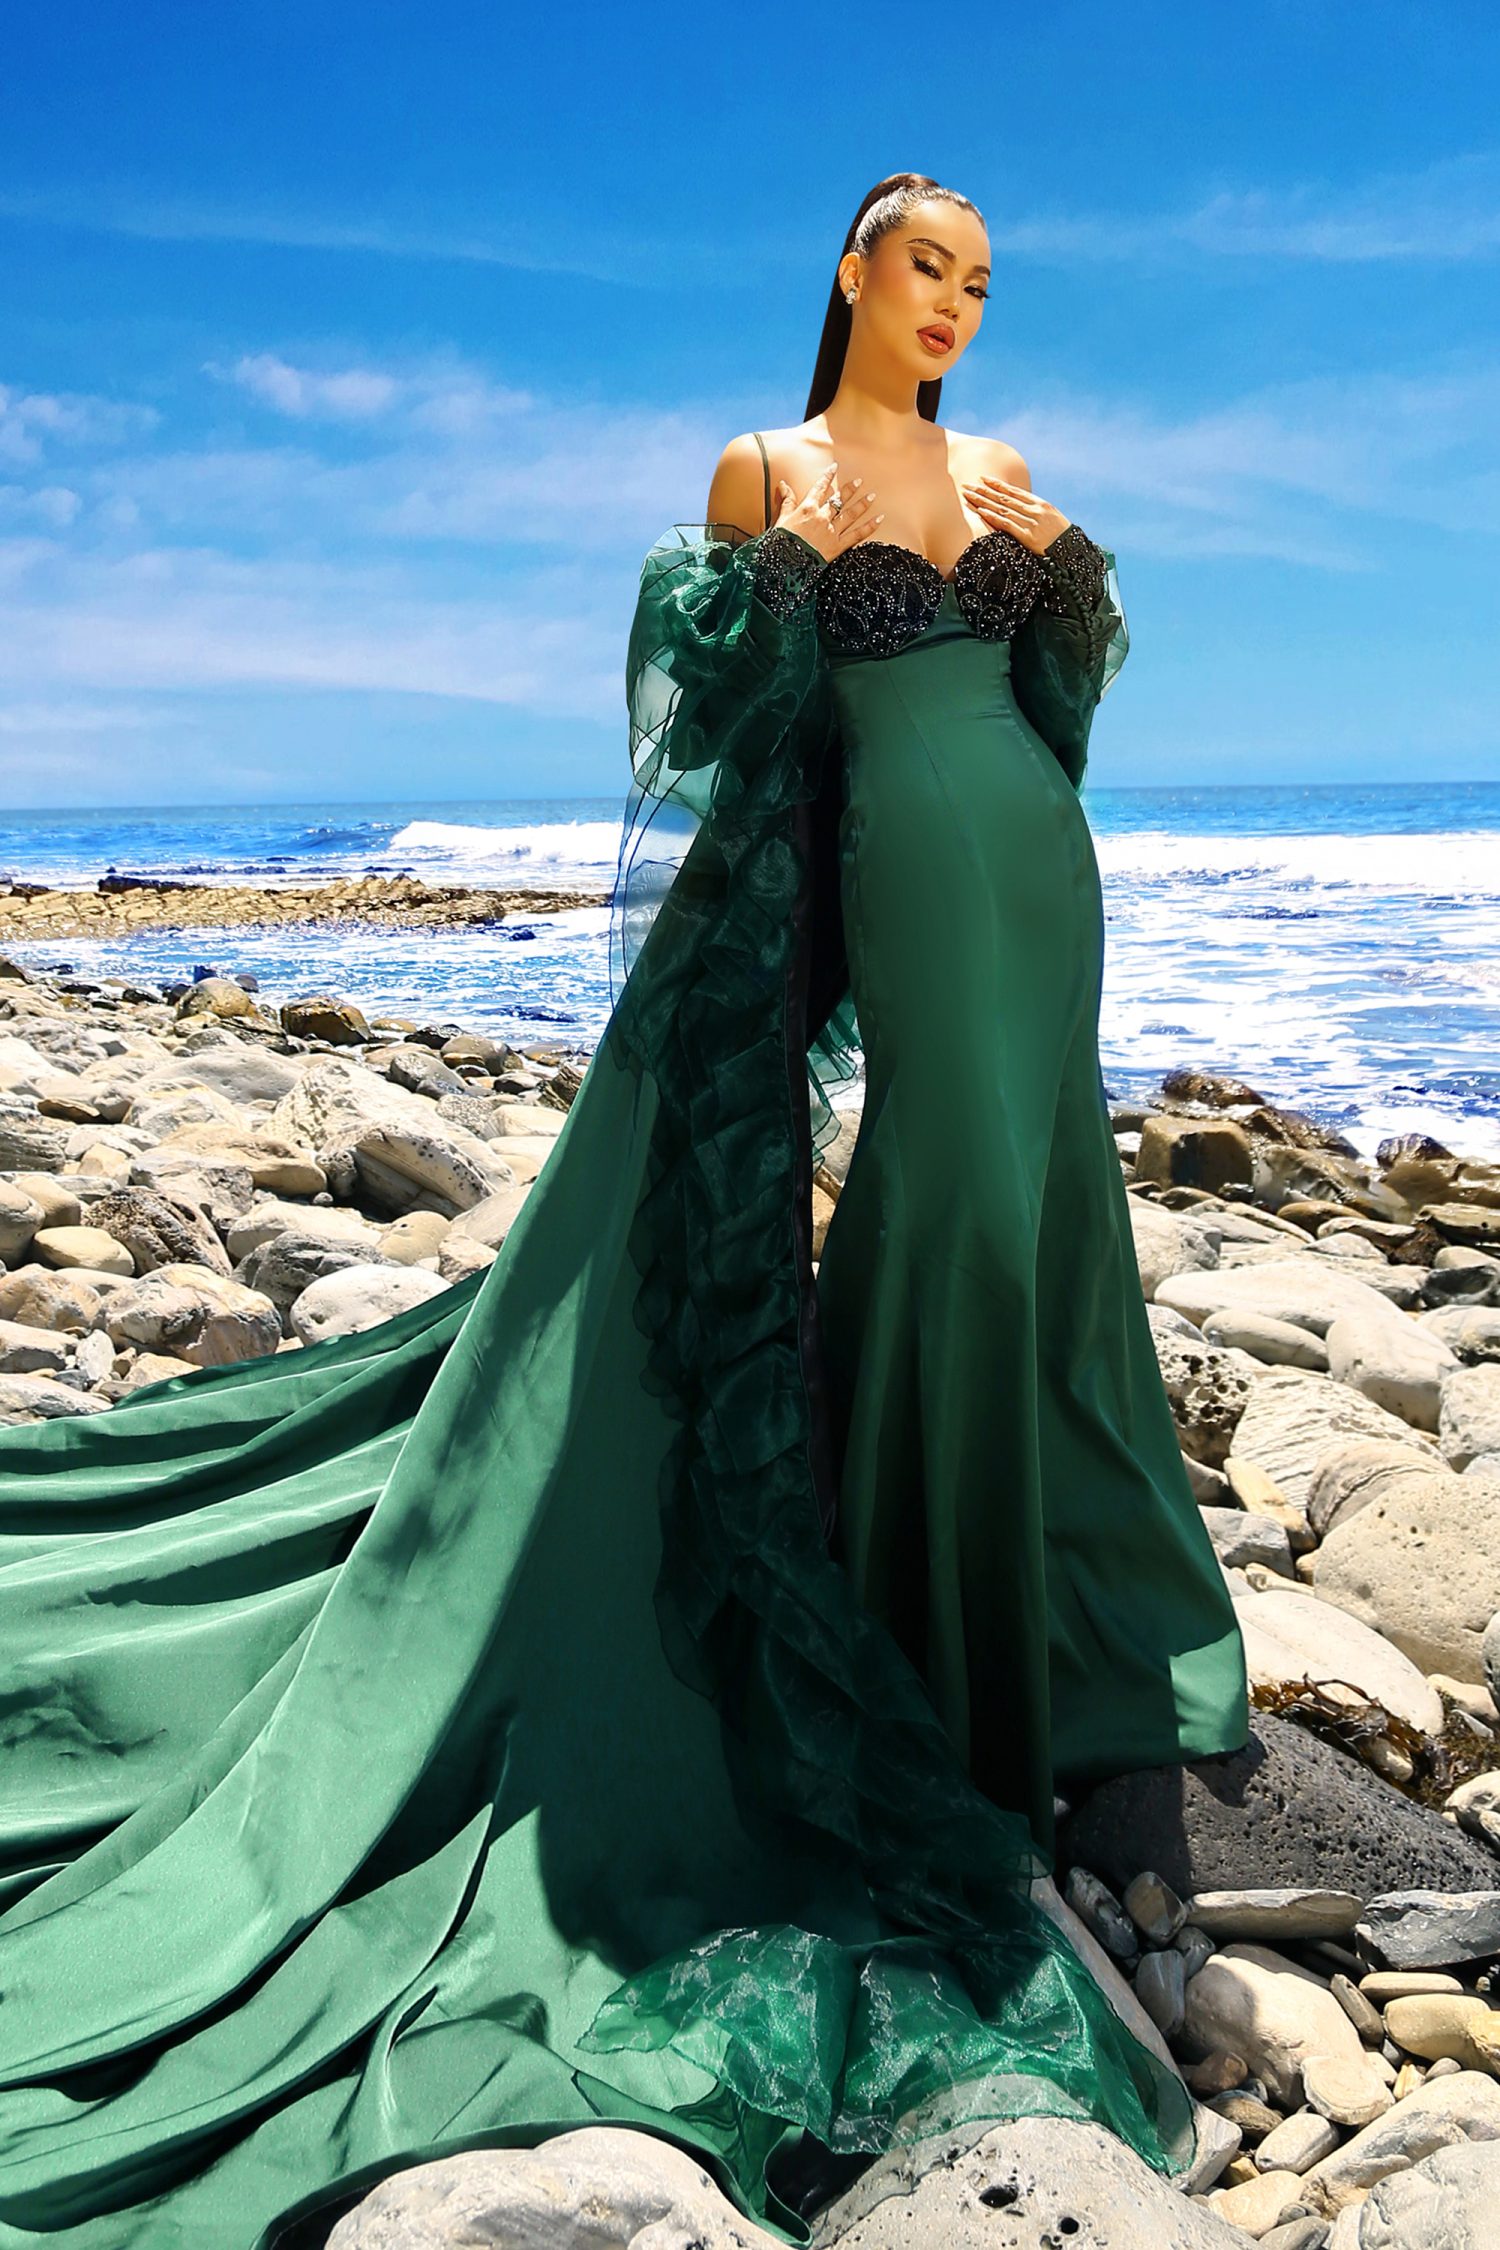 Strapless Gown Embrace the allure of the strapless gown, a symbol of timeless elegance and modern sophistication. This emerald green couture piece, with its flawless strapless bodice, is designed to celebrate the contours of your figure. The V-shaped neckline plunges with daring grace, offering a glimpse of allure while maintaining an air of chic poise. Satin Fabric The gown is crafted from the finest satin fabric, known for its lustrous sheen and luxurious feel. The material wraps around you in a loving embrace, enhancing your natural grace with its smooth texture. The satin catches the light with every movement, creating a dynamic display of shimmering elegance. Organza Ruffled Cape Adding a dramatic flair to the ensemble is the organza ruffled cape. This statement piece flows from the shoulders like a waterfall of fabric, its ruffles dancing with each step you take. The organza is sheer yet structured, creating a visual spectacle that is both ethereal and commanding. Cape Sleeve Dress The cape sleeve dress design merges the freedom of a cape with the formality of a gown. The sleeves drape beautifully, offering a unique silhouette that is both avant-garde and reminiscent of classic Hollywood glamour. This design choice speaks to a bold fashion sense, willing to push boundaries while respecting tradition. Devon Couture Devon Couture is the artisan behind this magnificent creation. A name that evokes images of bespoke tailoring and exquisite designs, Devon Couture stands at the forefront of fashion innovation. This gown is a testament to their mastery of the craft, a piece that transcends trends to become a timeless icon of style. In this gown, you are not merely attending an event; you are the event. The strapless design, the satin fabric, the organza cape—all come together to create a masterpiece that is the very definition of couture. As you make your entrance, the gown becomes an extension of your persona, a reflection of your grace, and a symbol of your indomitable style. Embrace the night with the assurance that comes from wearing a piece of Devon Couture, knowing that in this gown, you are the epitome of sophistication. Let the strapless gown with its satin fabric and organza ruffled cape be your armor and your crown as you navigate the evening, a true vision of modern-day royalty. With every step, the gown tells a story of elegance, allure, and a romance with fashion that is deep and enduring. You are not just making an appearance; you are creating a moment—a moment that will be remembered long after the night has ended. Let this gown be your declaration of independence, a statement that in the world of fashion, you are a force to be reckoned with.